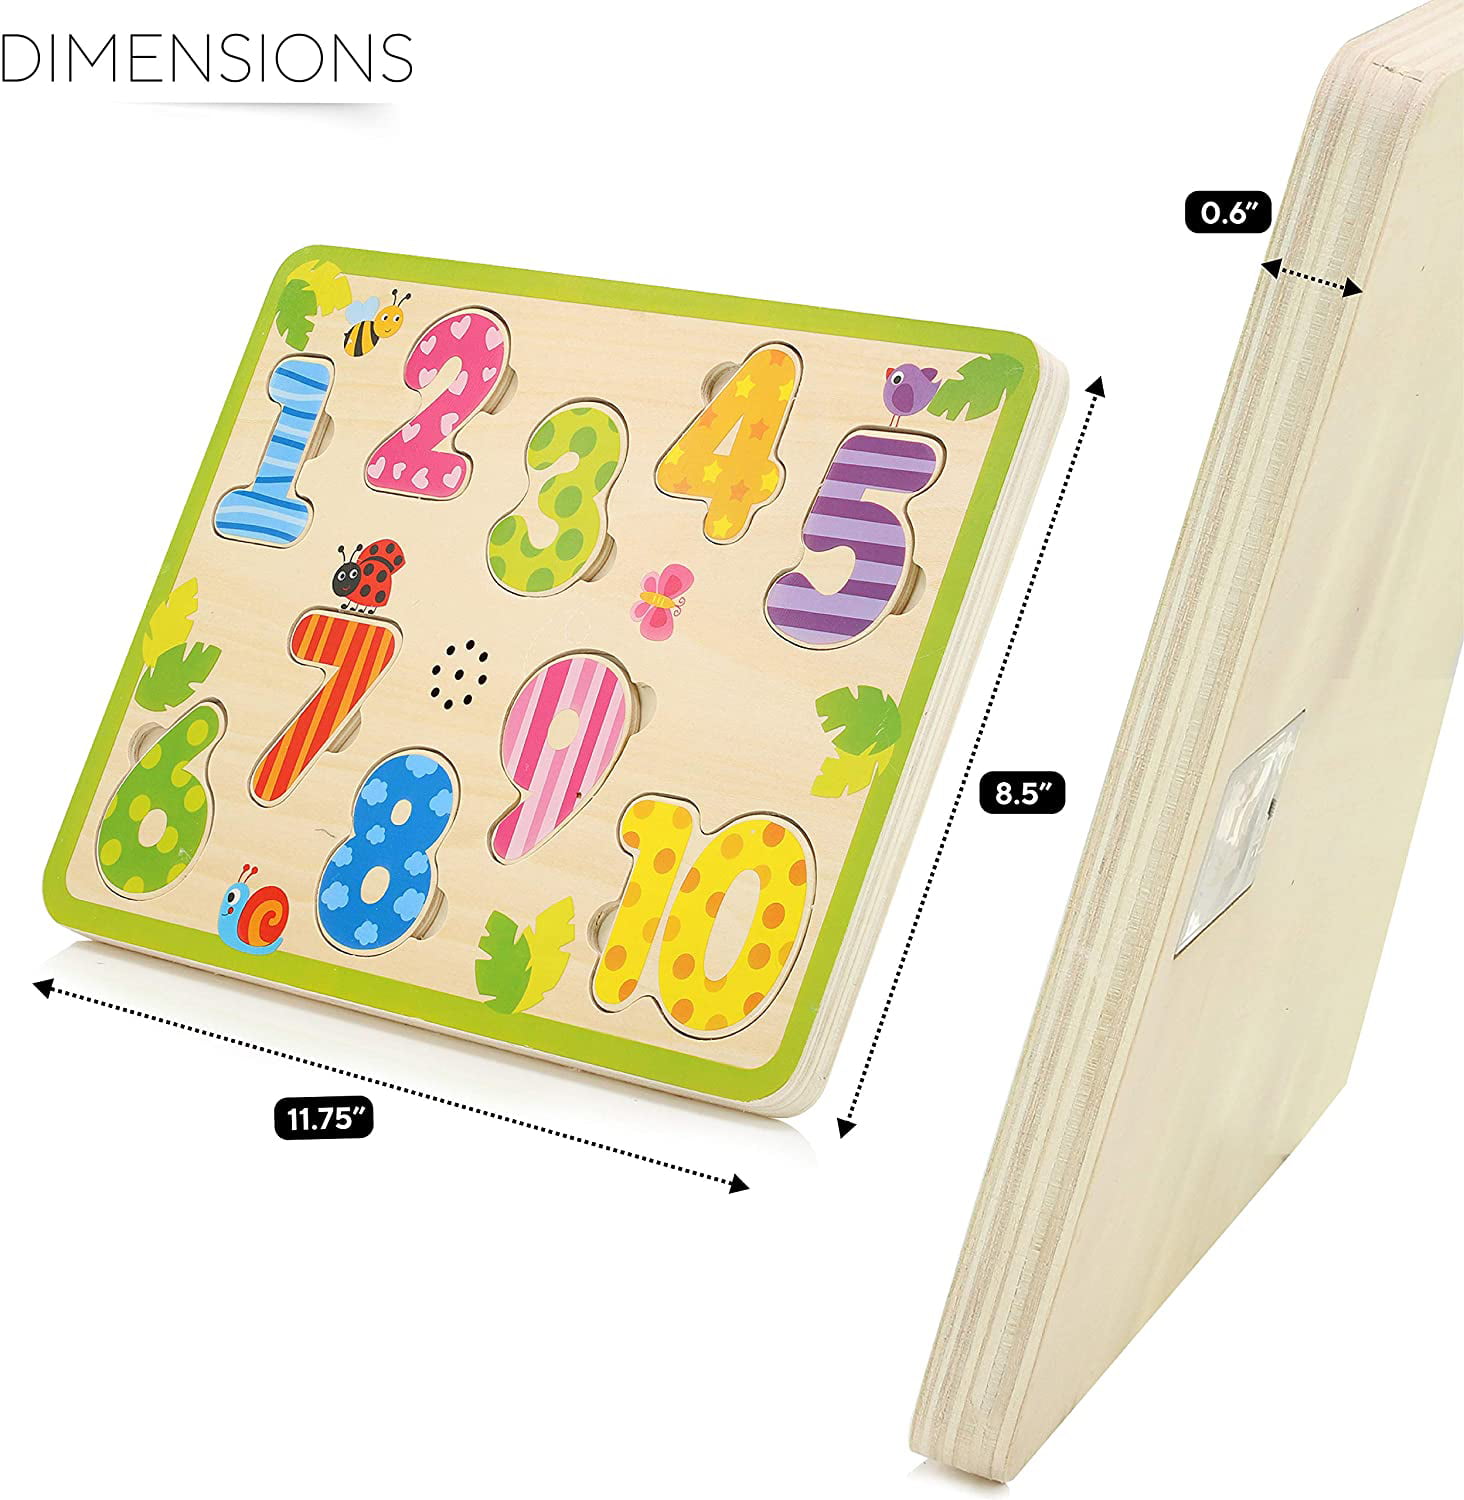 123 count with me. Learn all about numbers with wooden puzzle. 